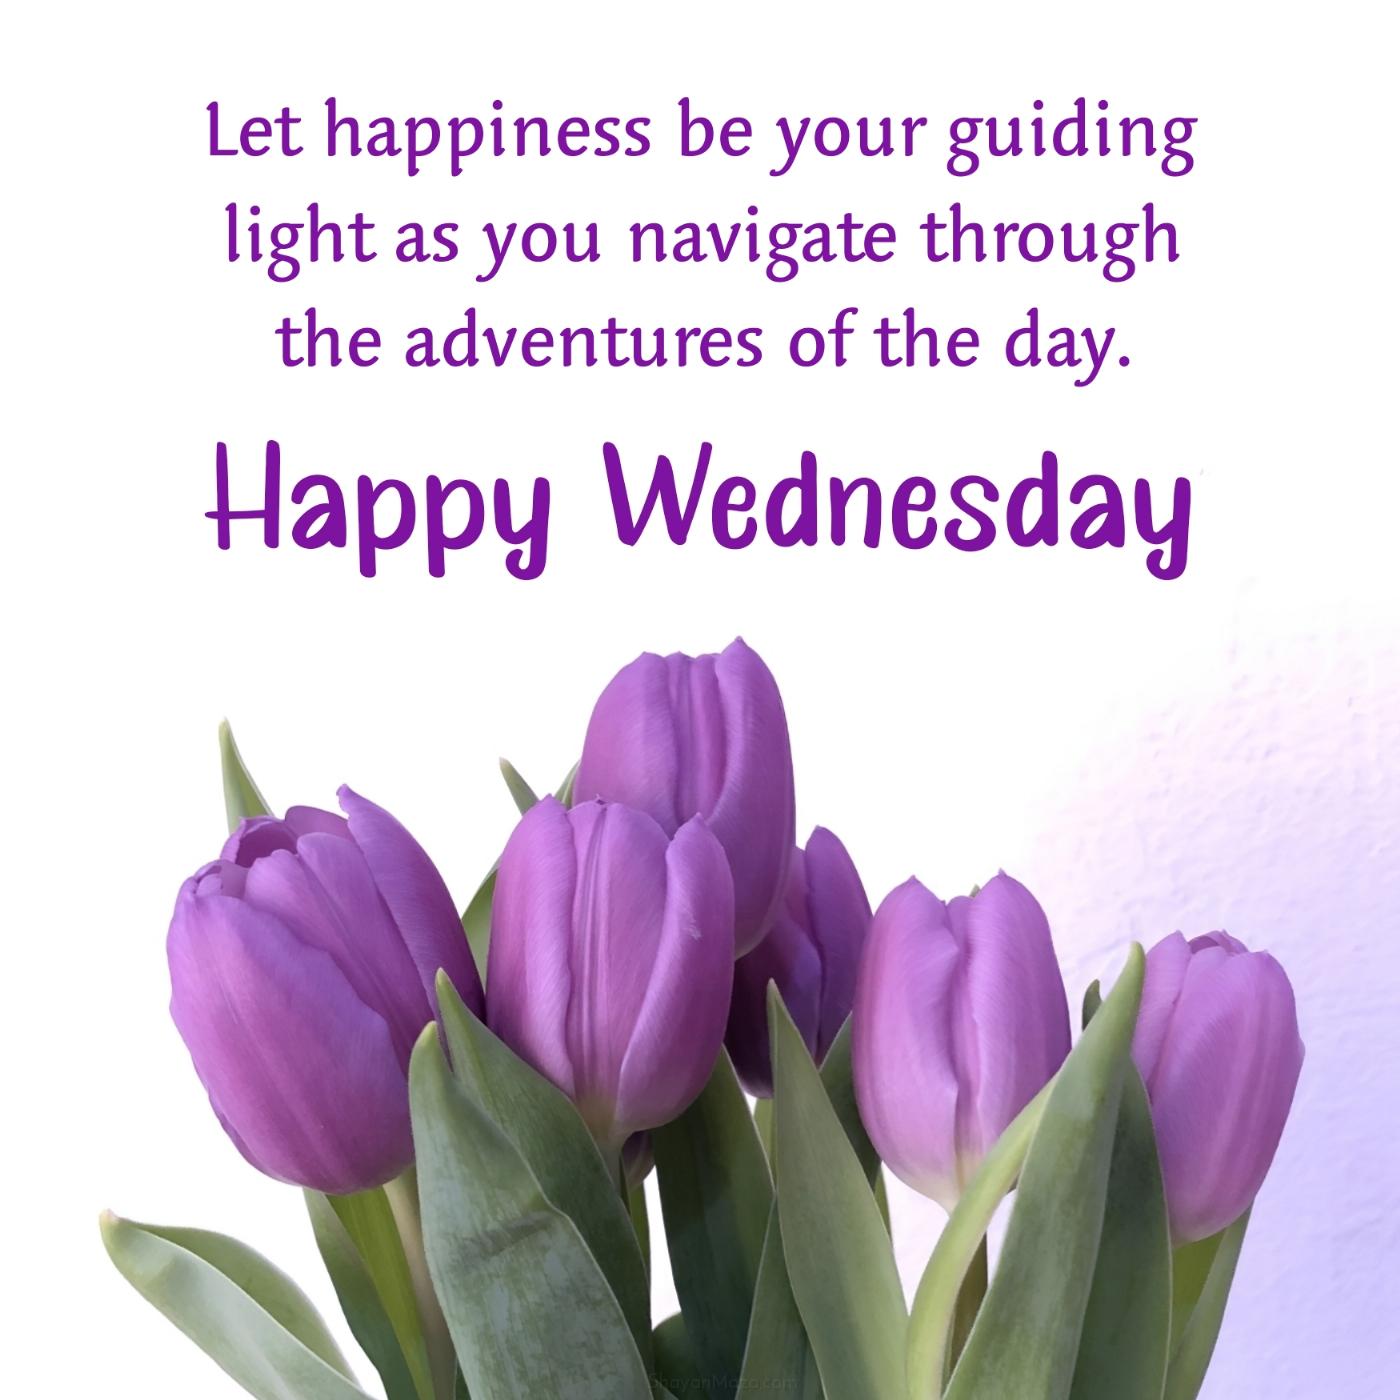 Happy Wednesday! Let happiness be your guiding light